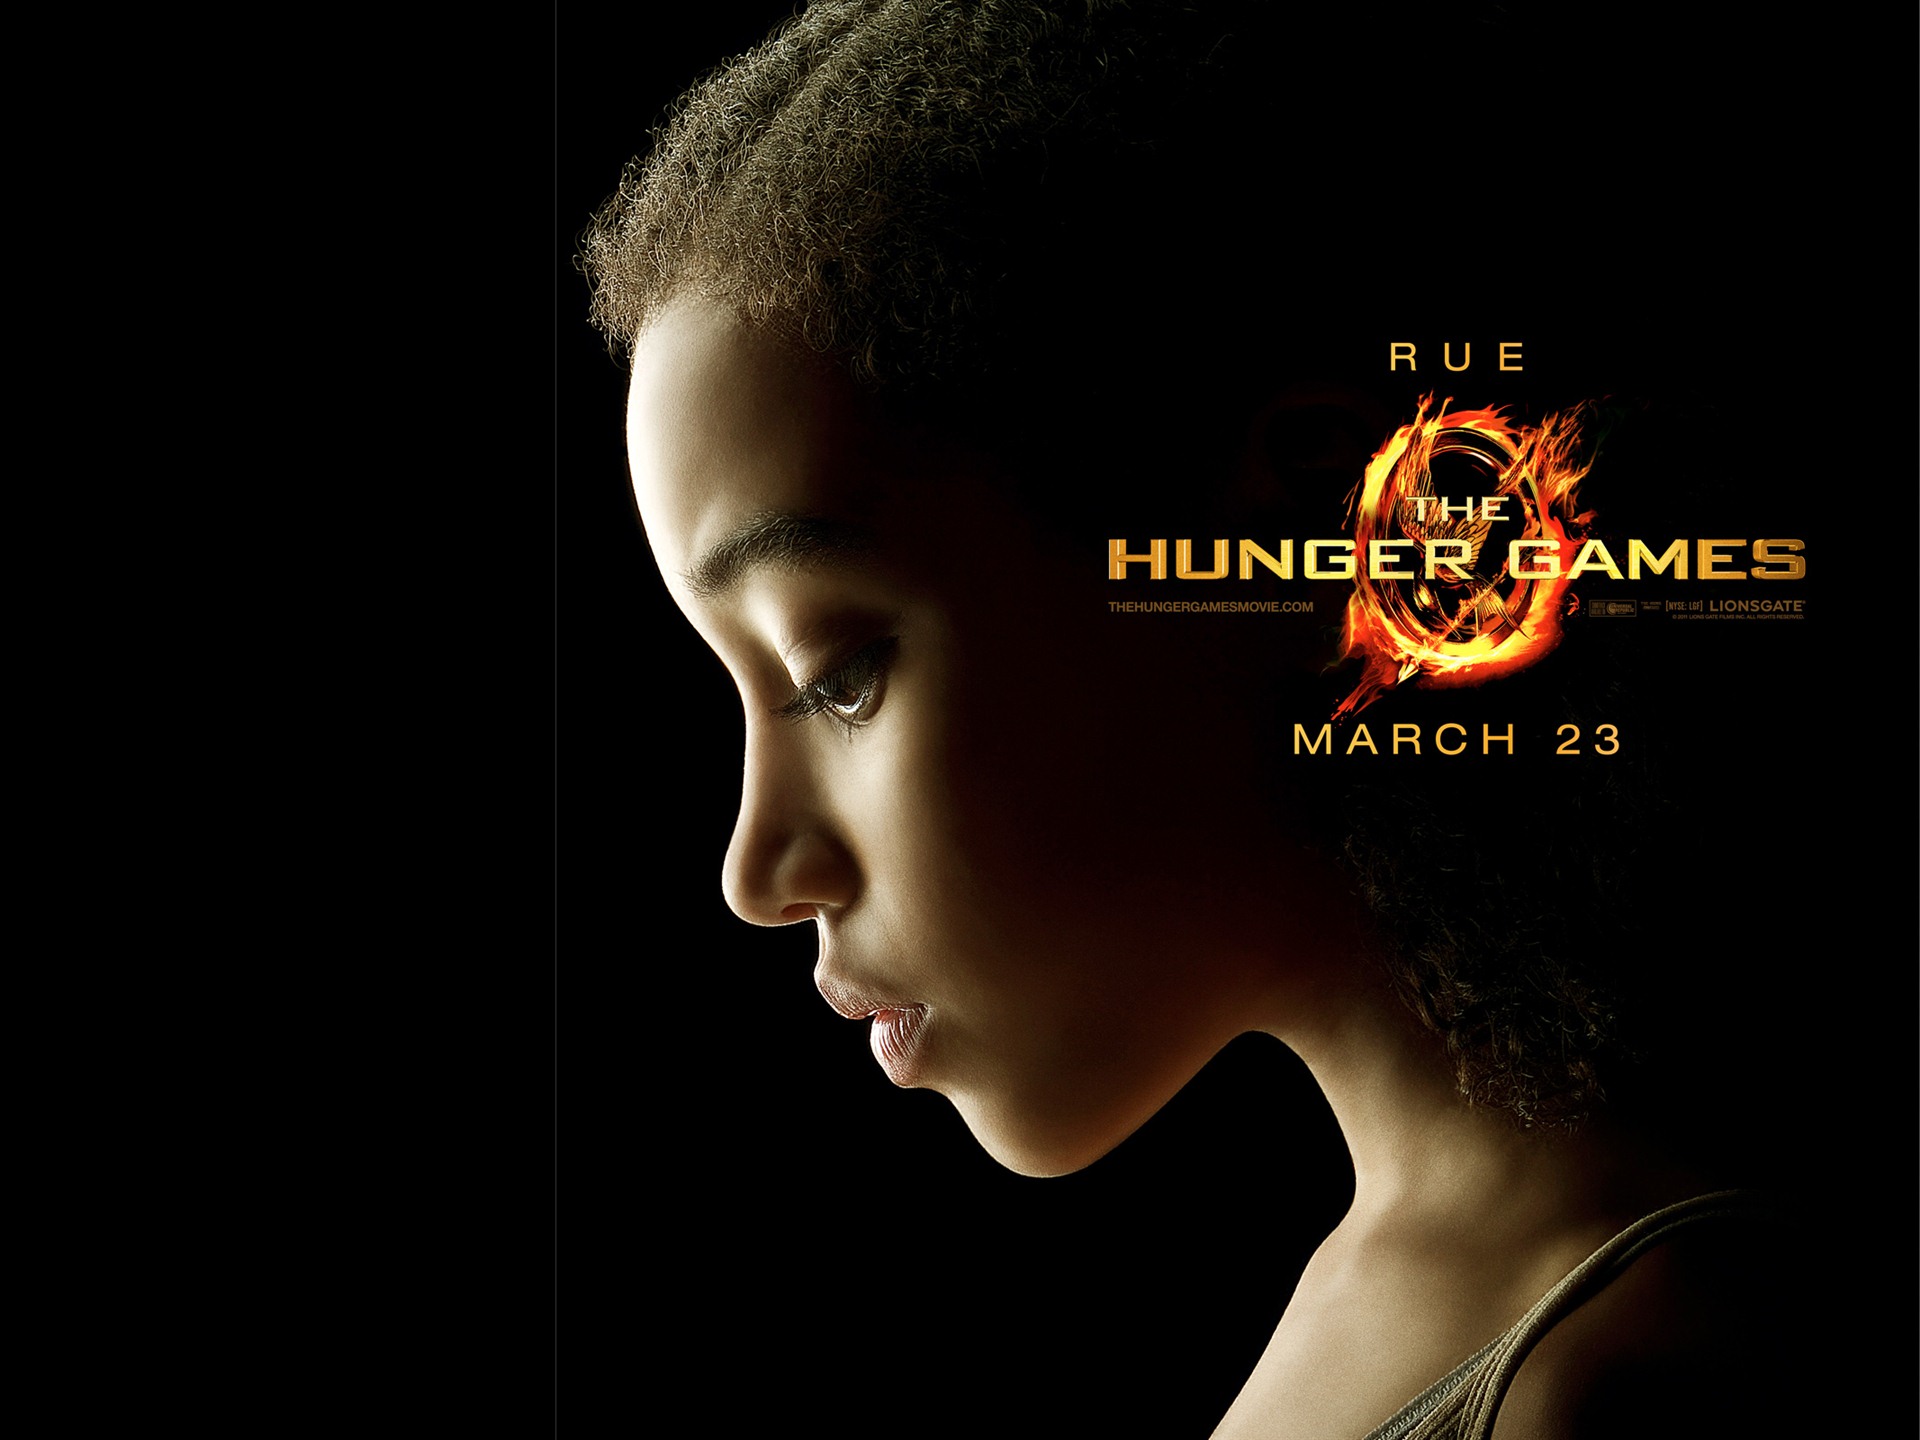 The Hunger Games HD wallpapers #2 - 1920x1440